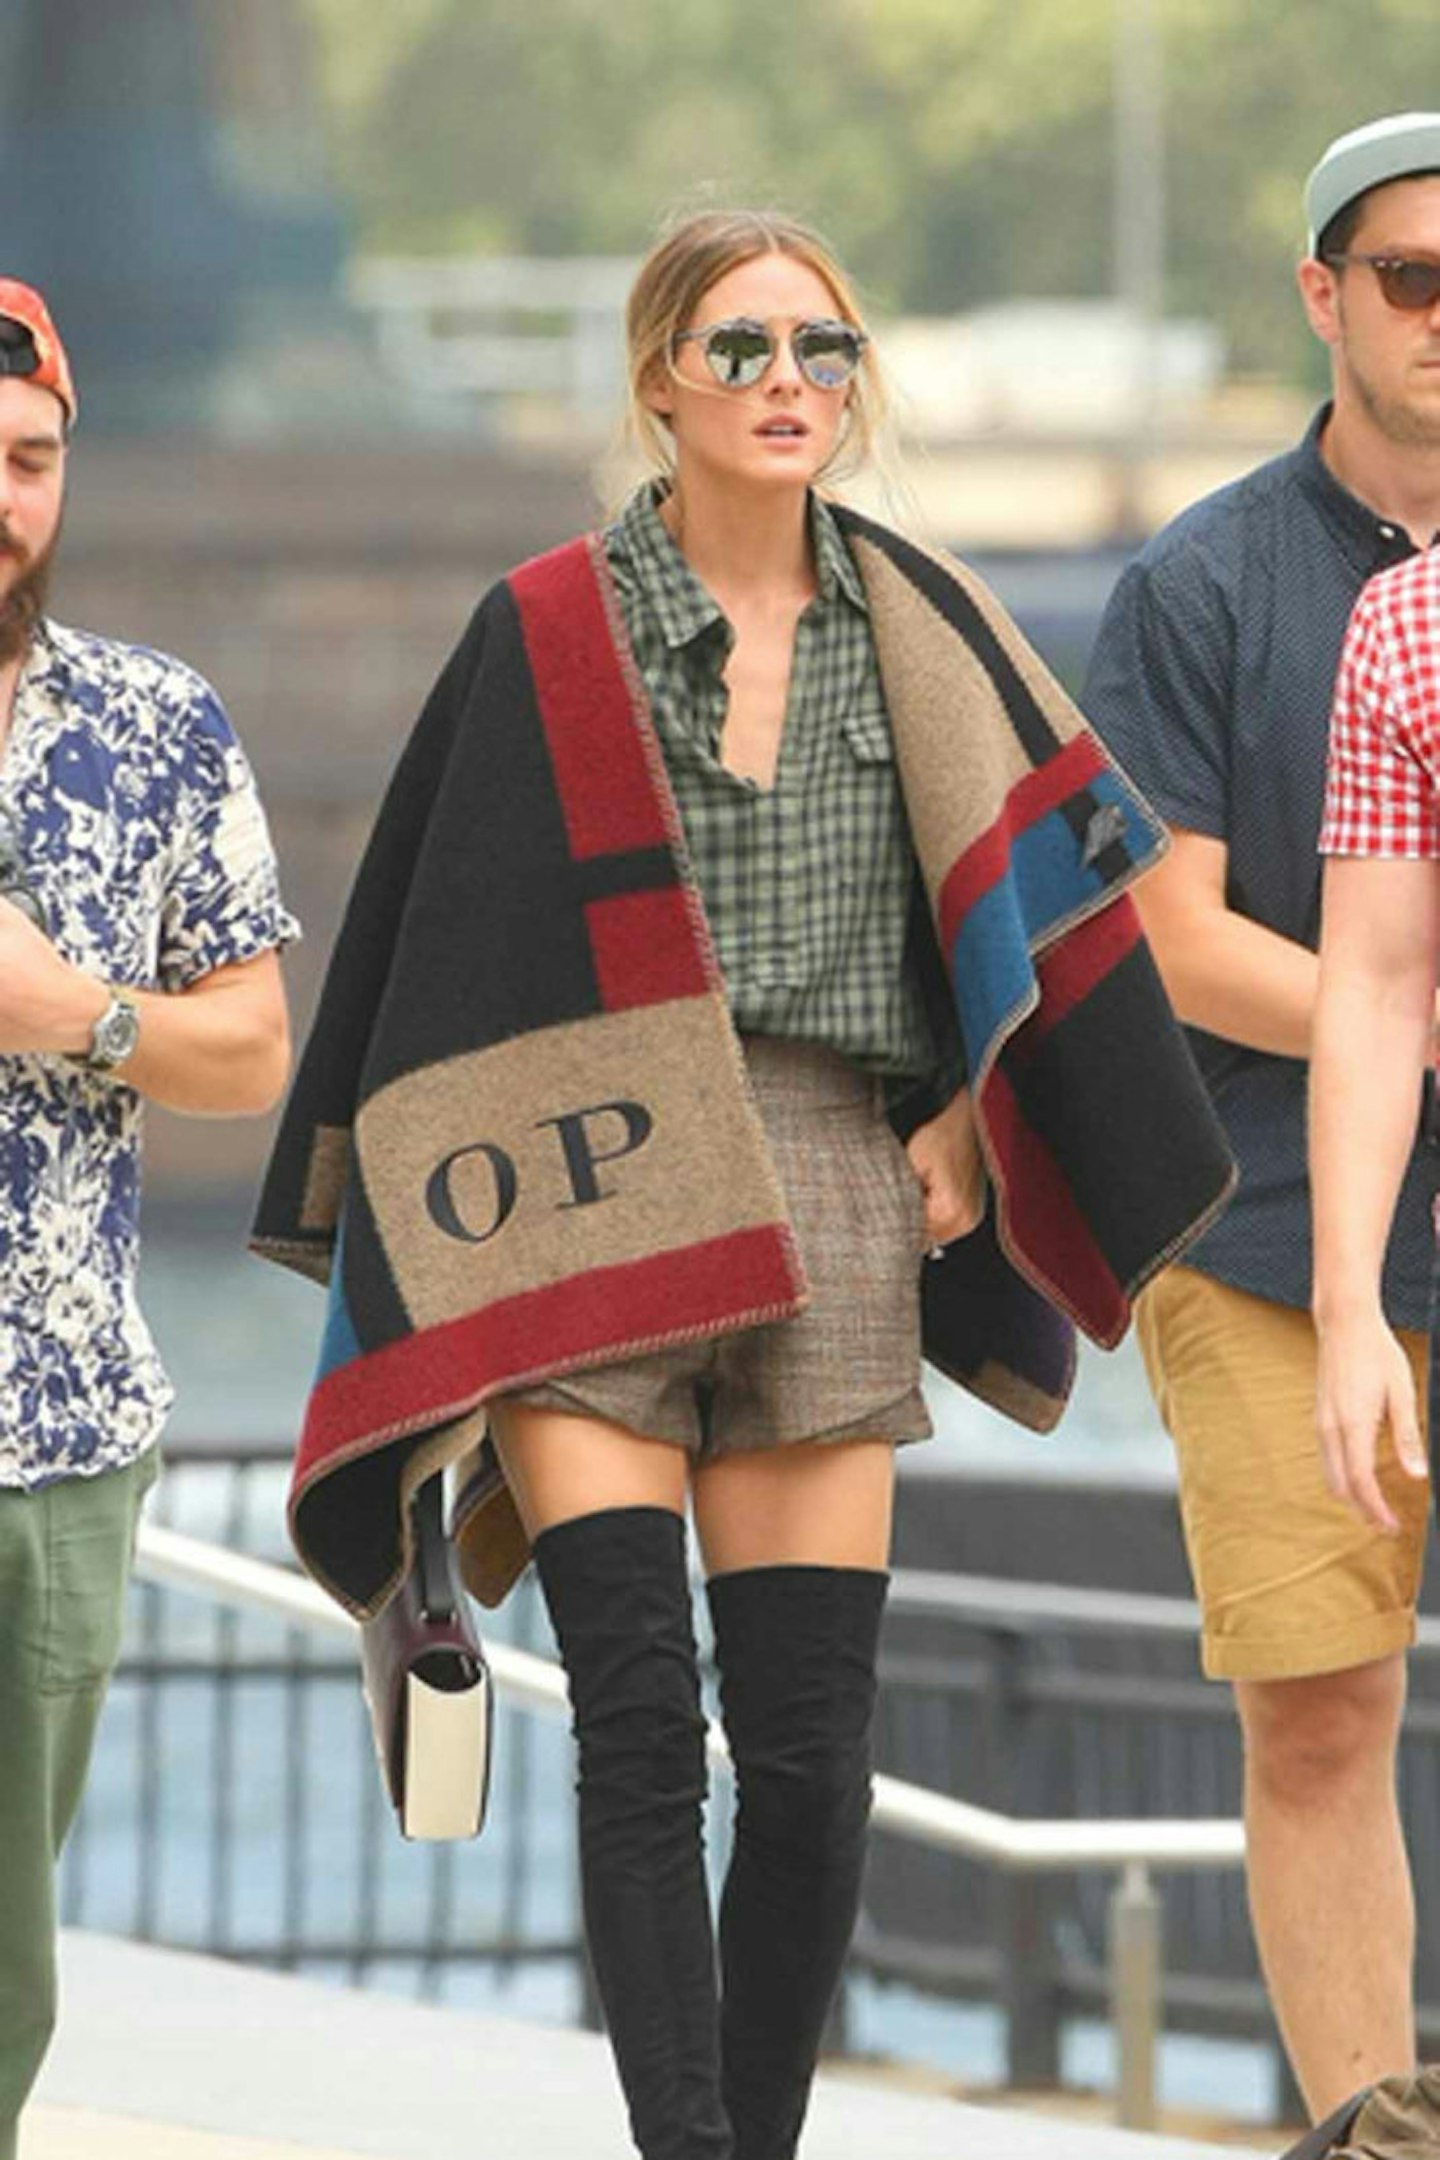 Who made Olivia Palermo's red patent handbag, blue print skirt, and black  boots? in 2023